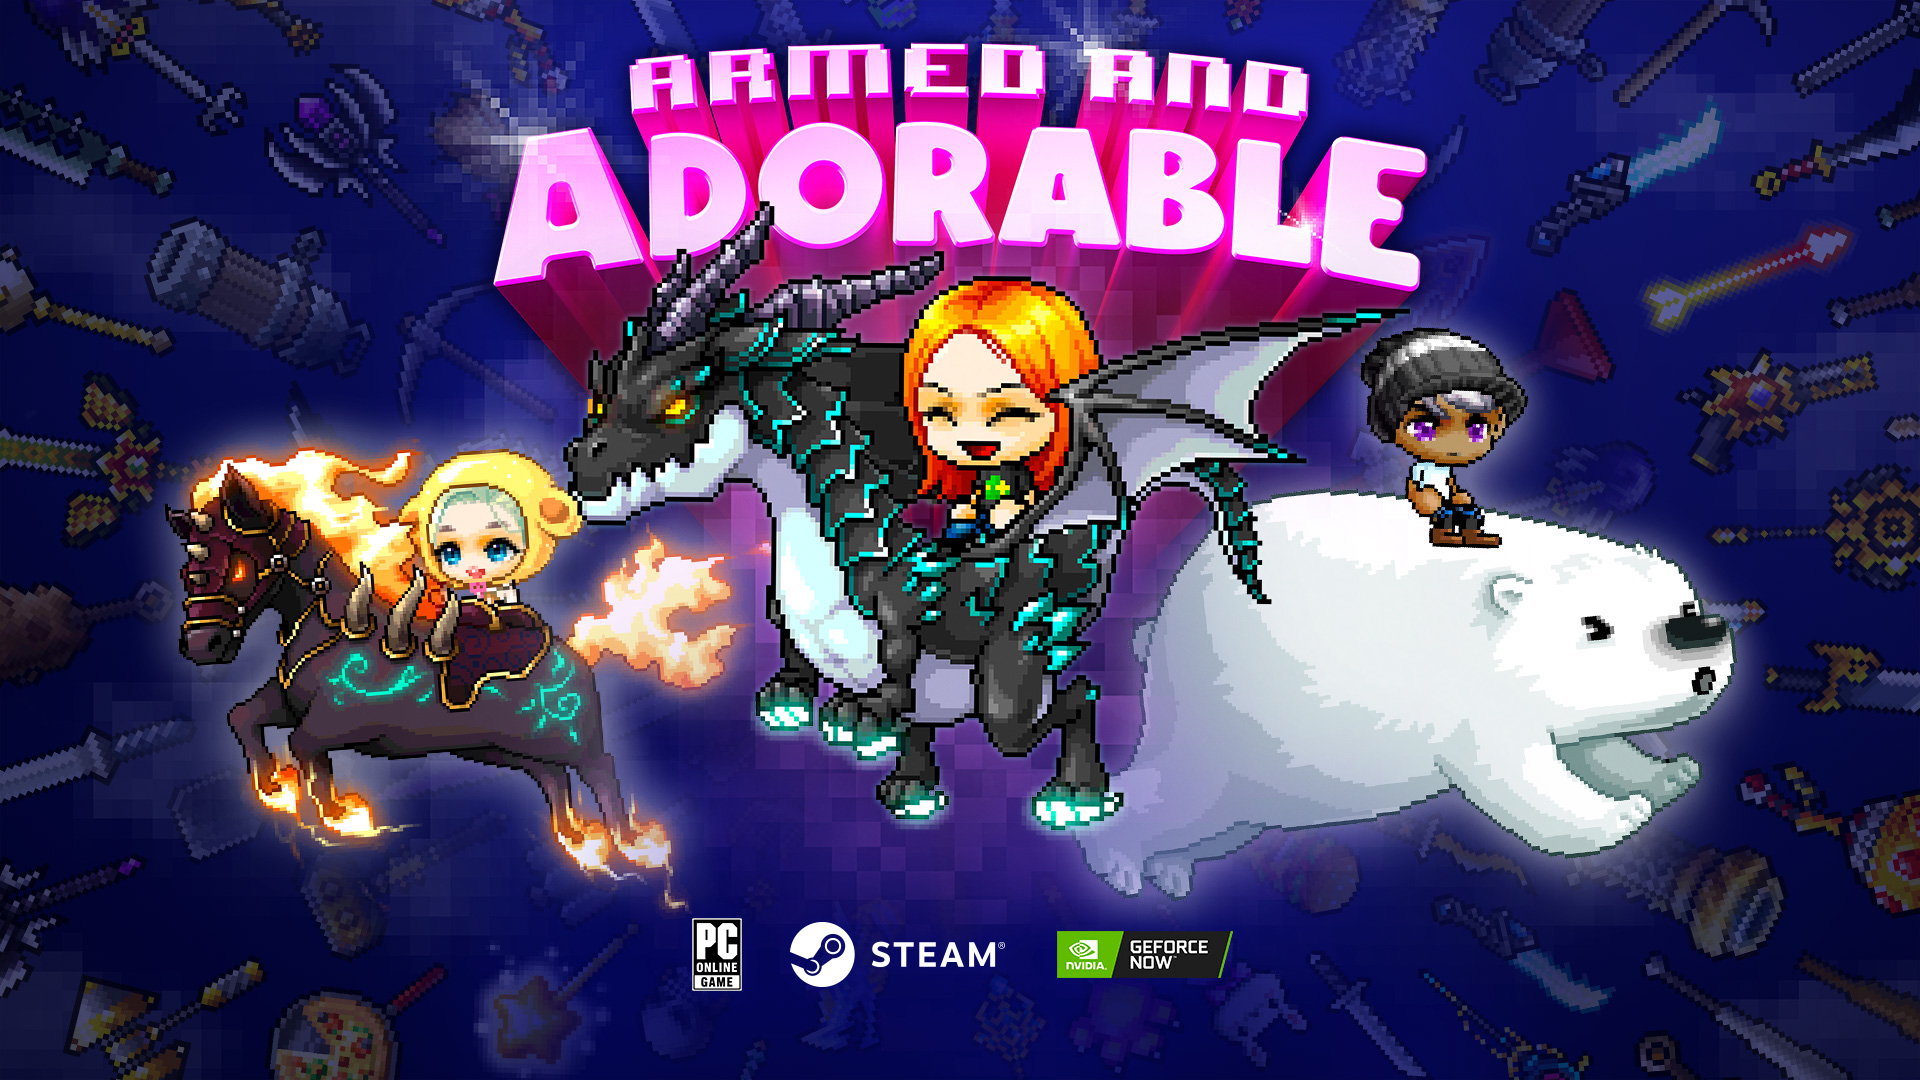 Armed and Adorable Trailer